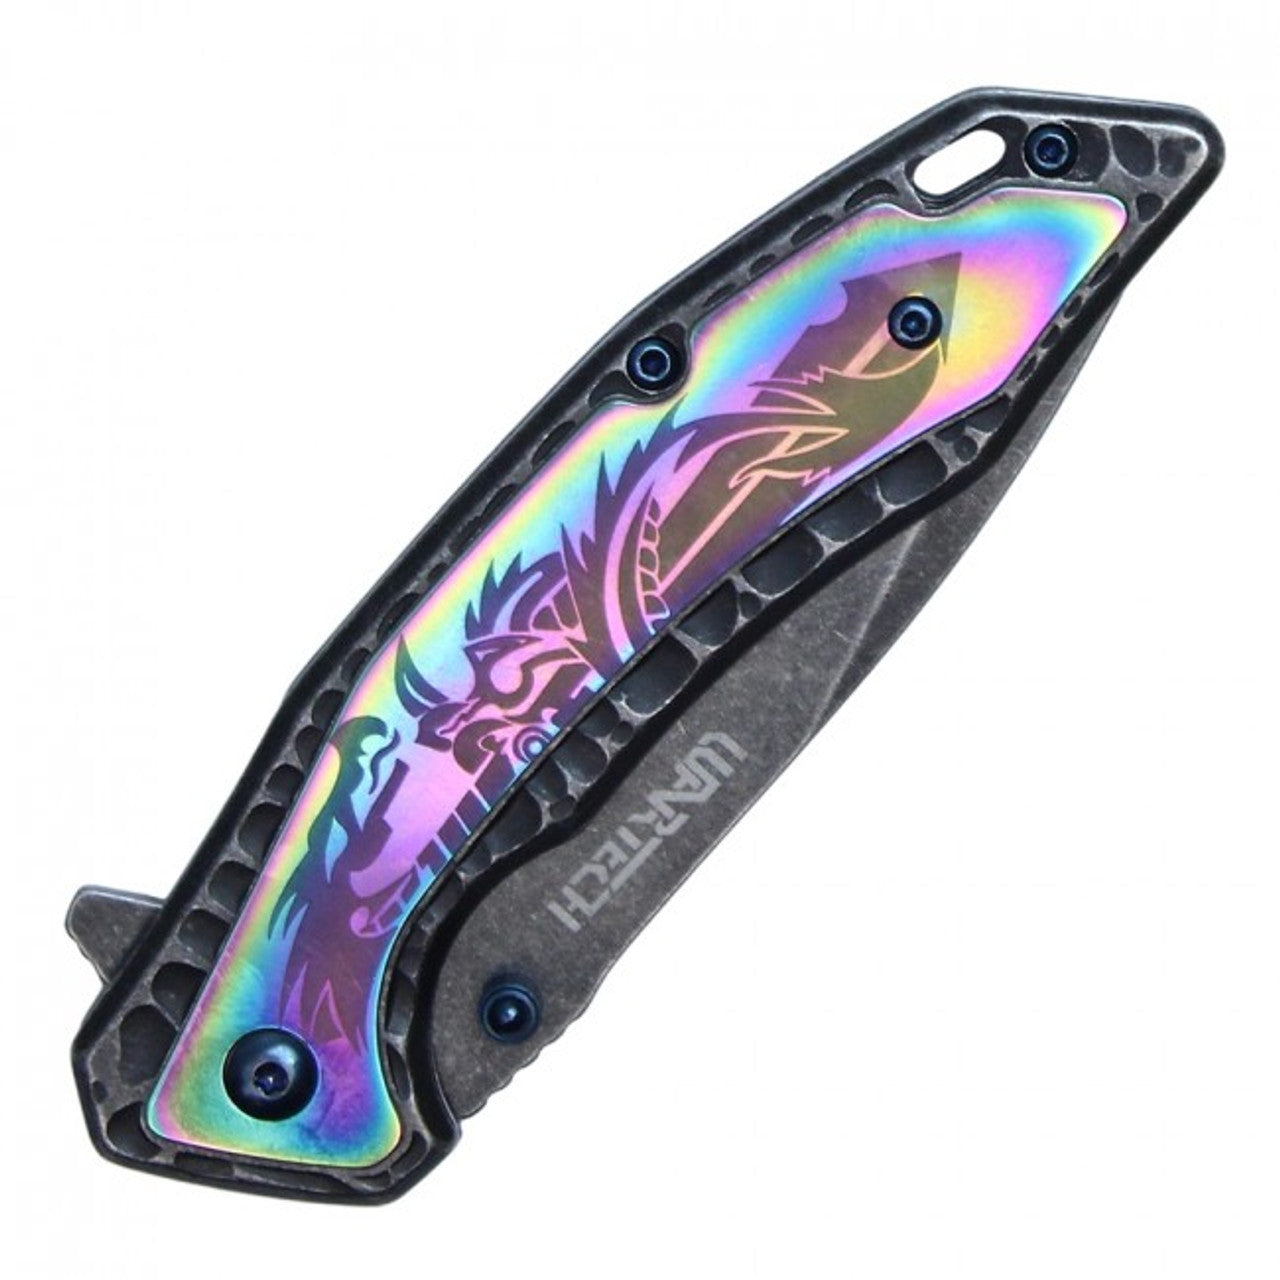 8” ASSISTED OPEN DRAGON POCKET KNIFE - RAINBOW